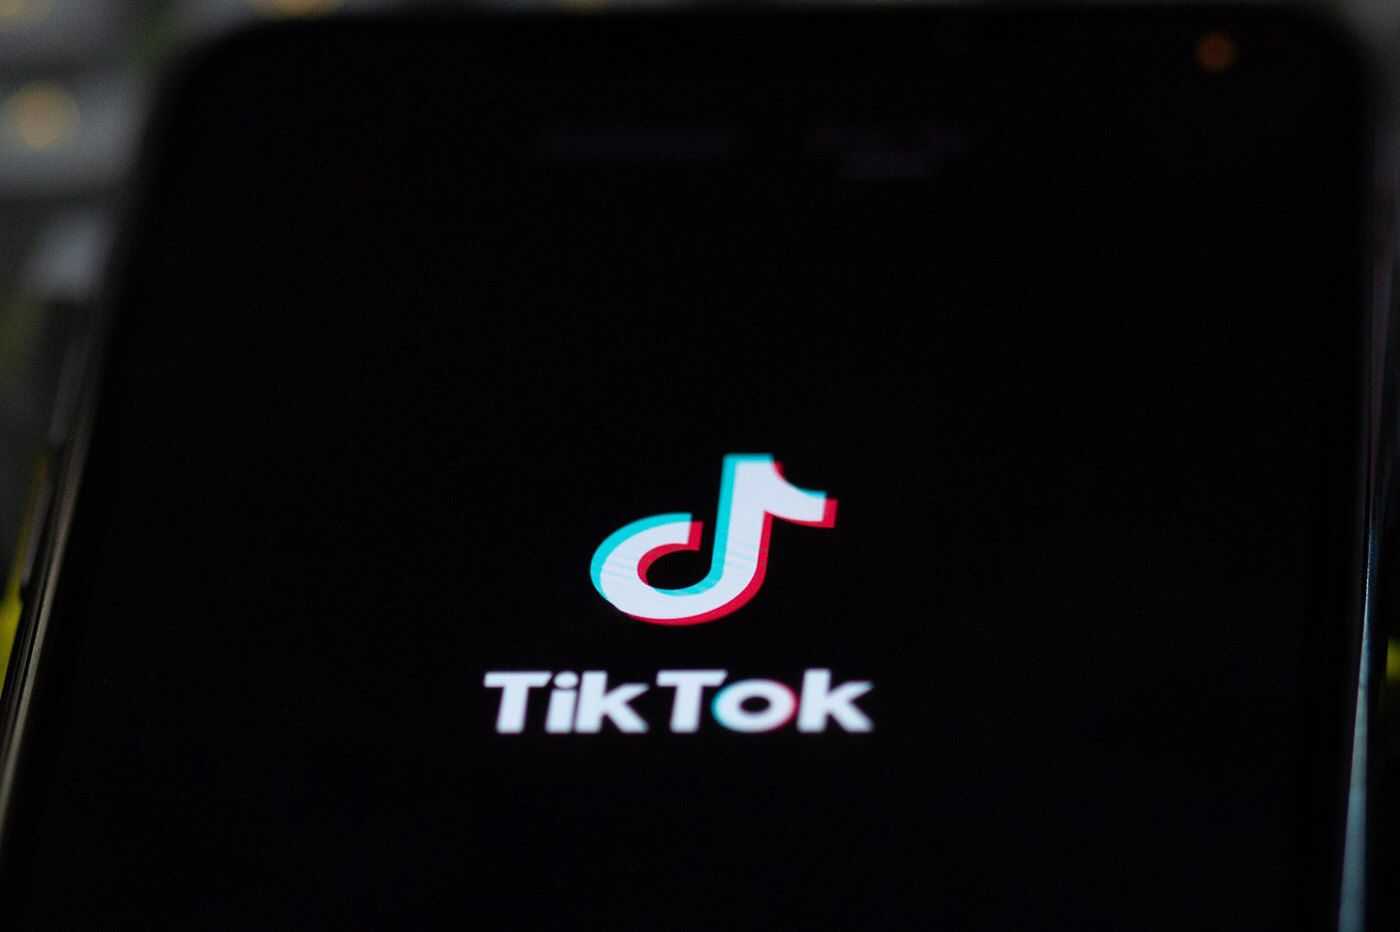 How to Download and Install TikTok: iOS, Android, Windows